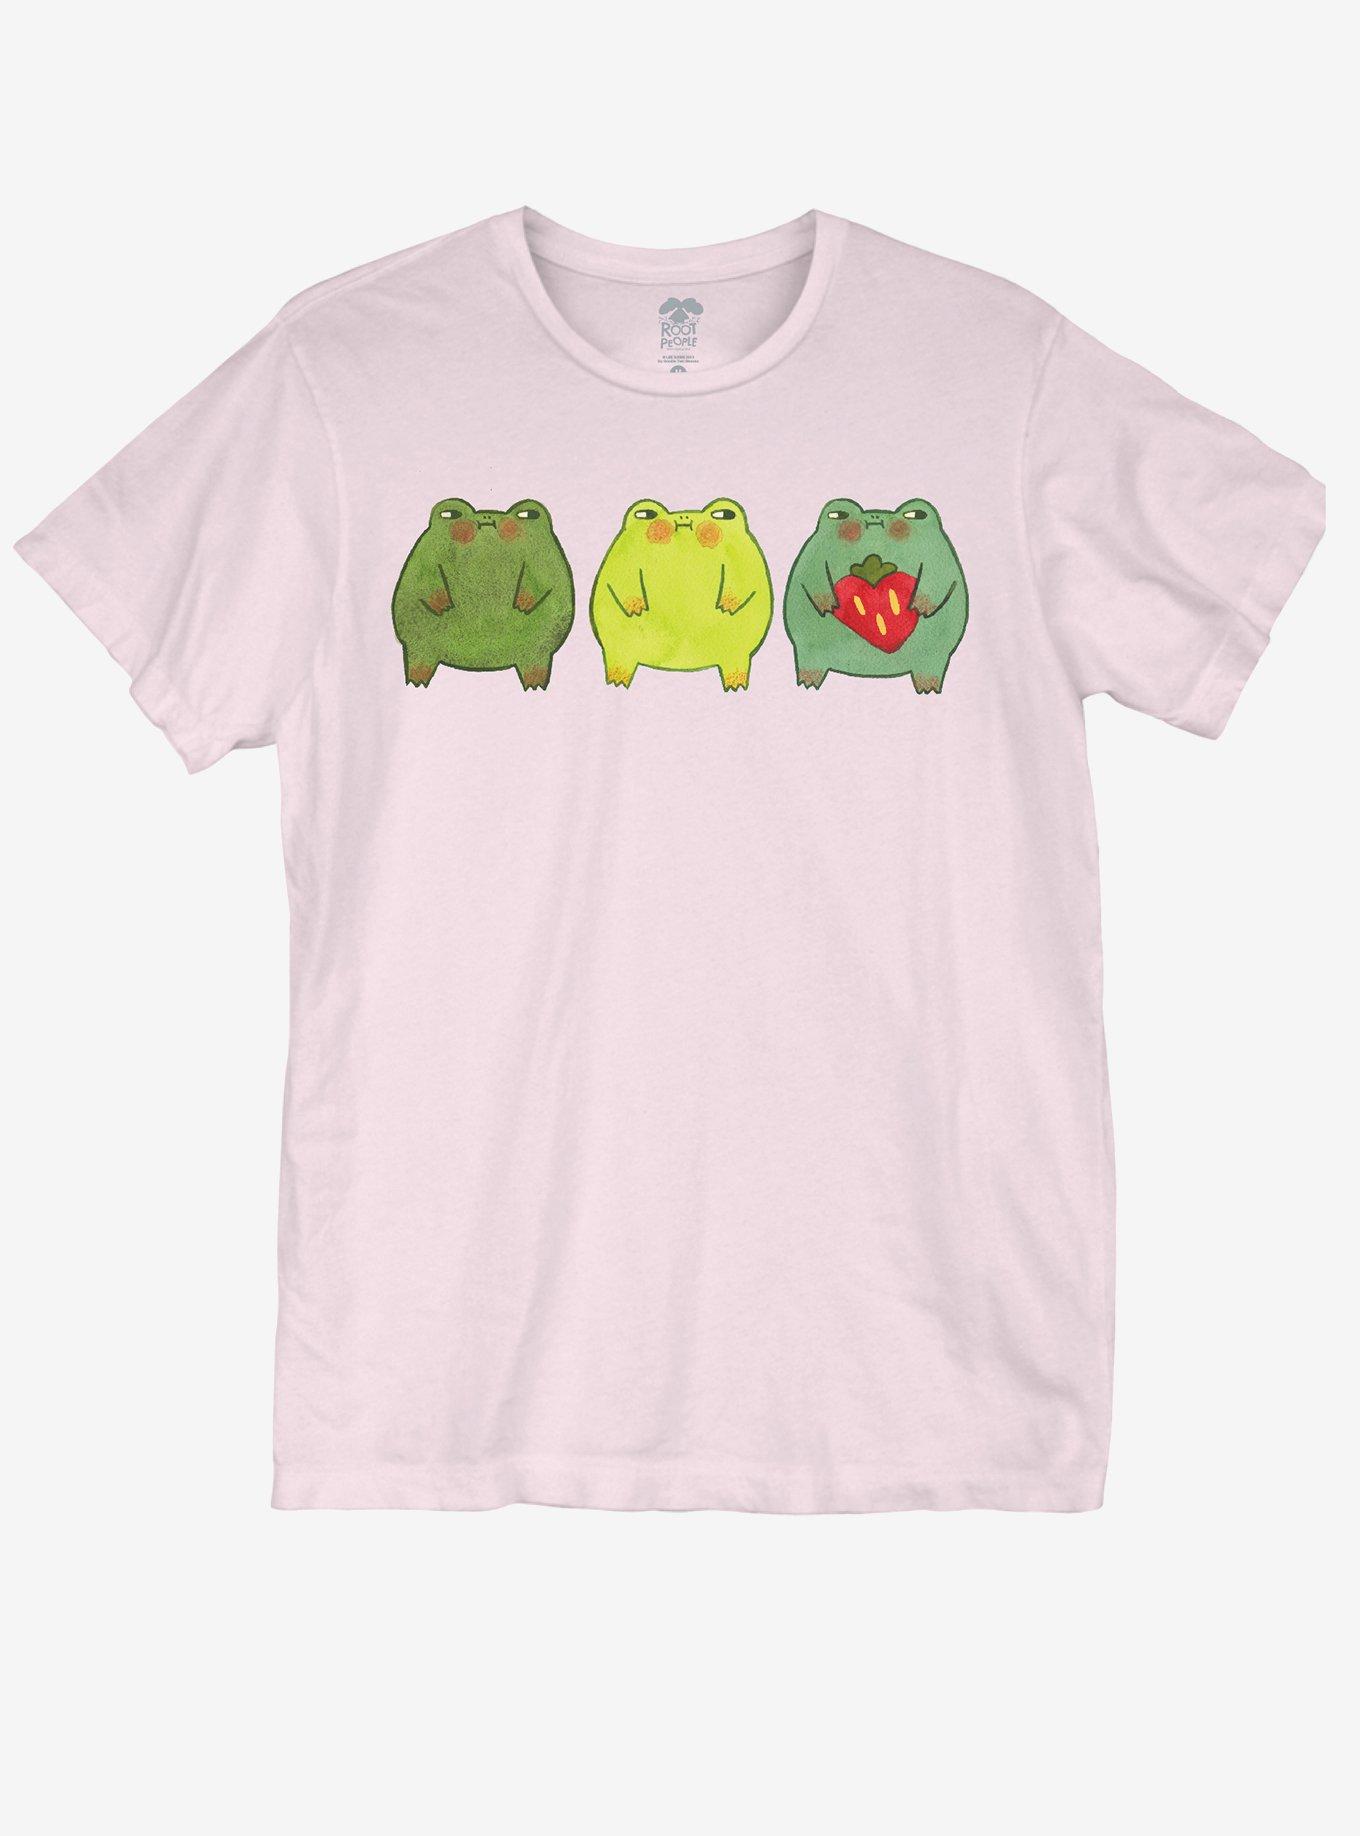 Hot Topic Minecraft Frog T-Shirt